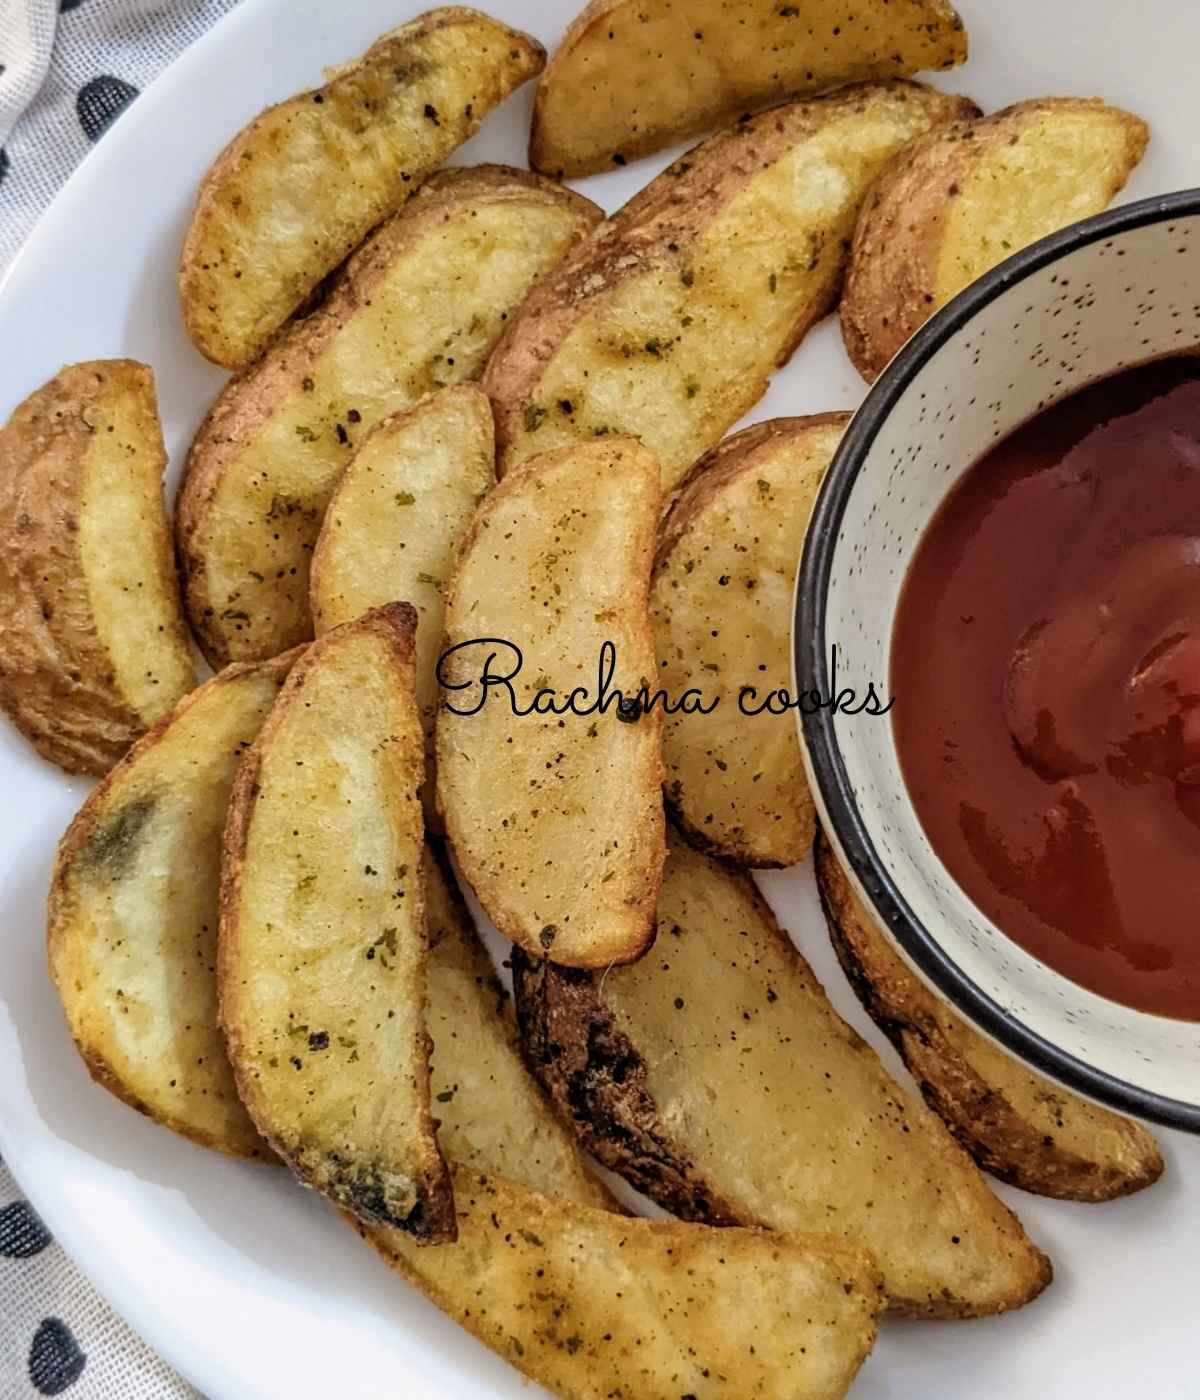 Frozen potato wedges after air frying on a white plate with ketchup in a bowl.